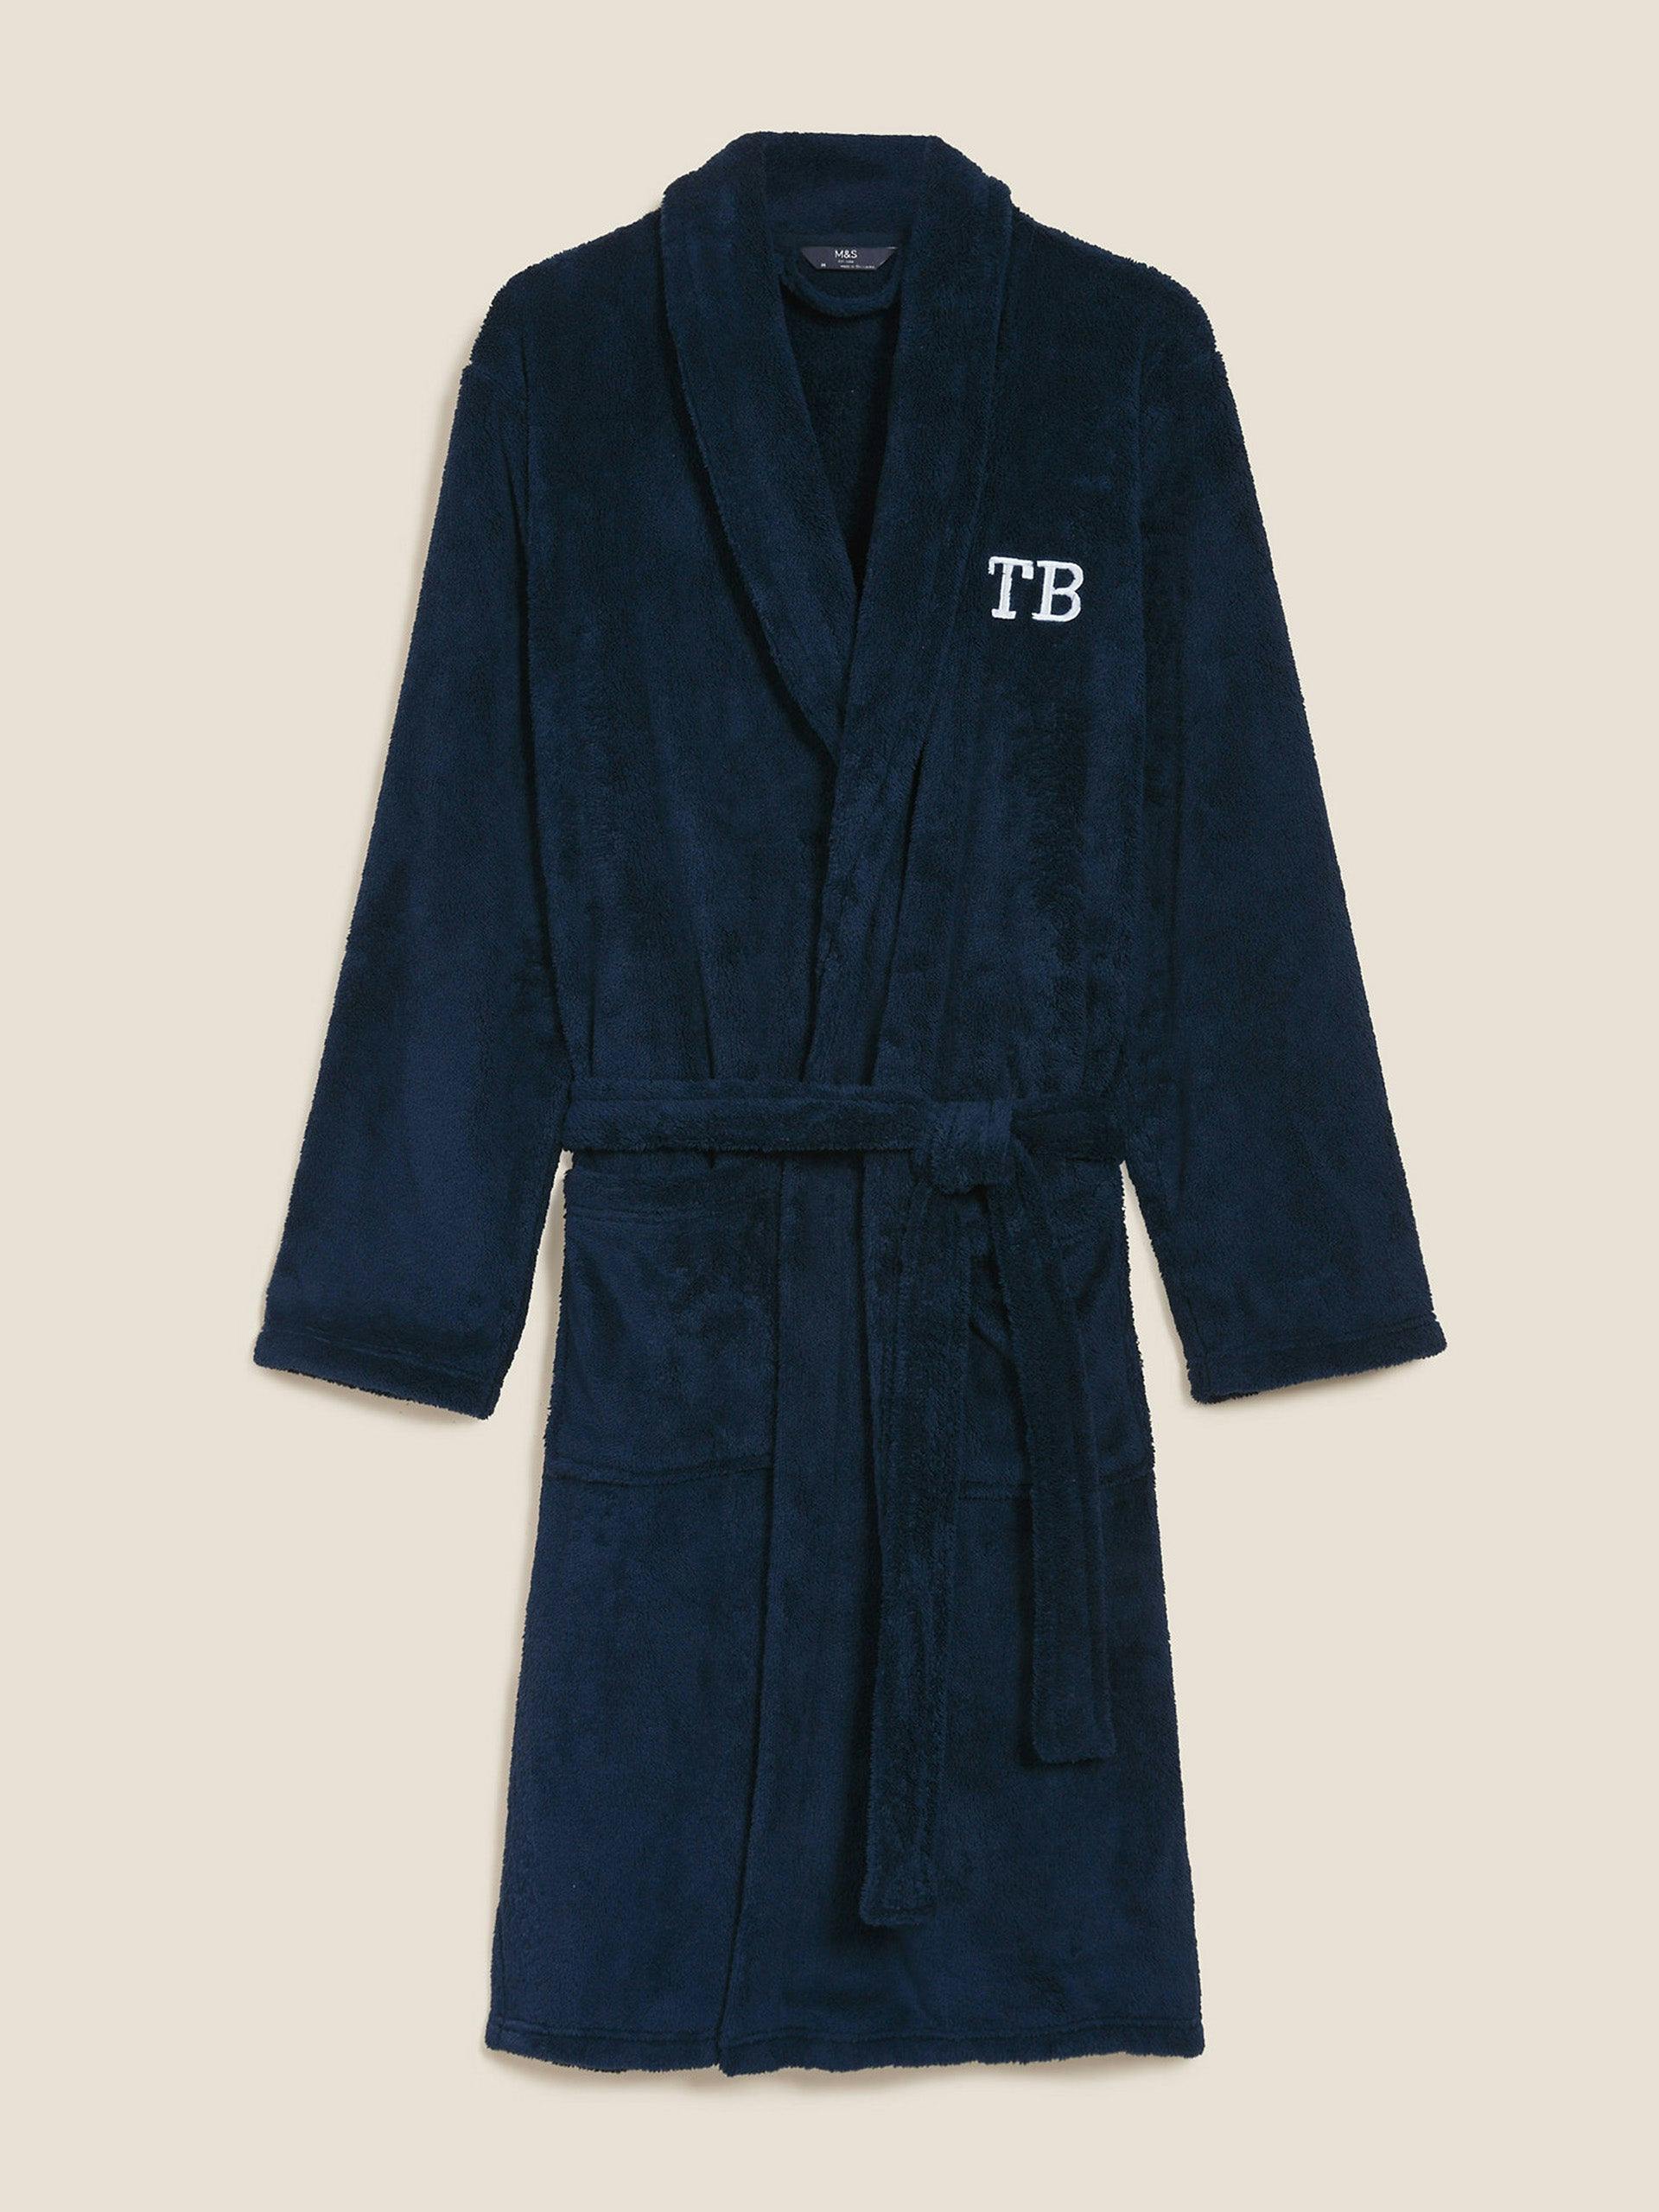 Personalised men's supersoft dressing gown